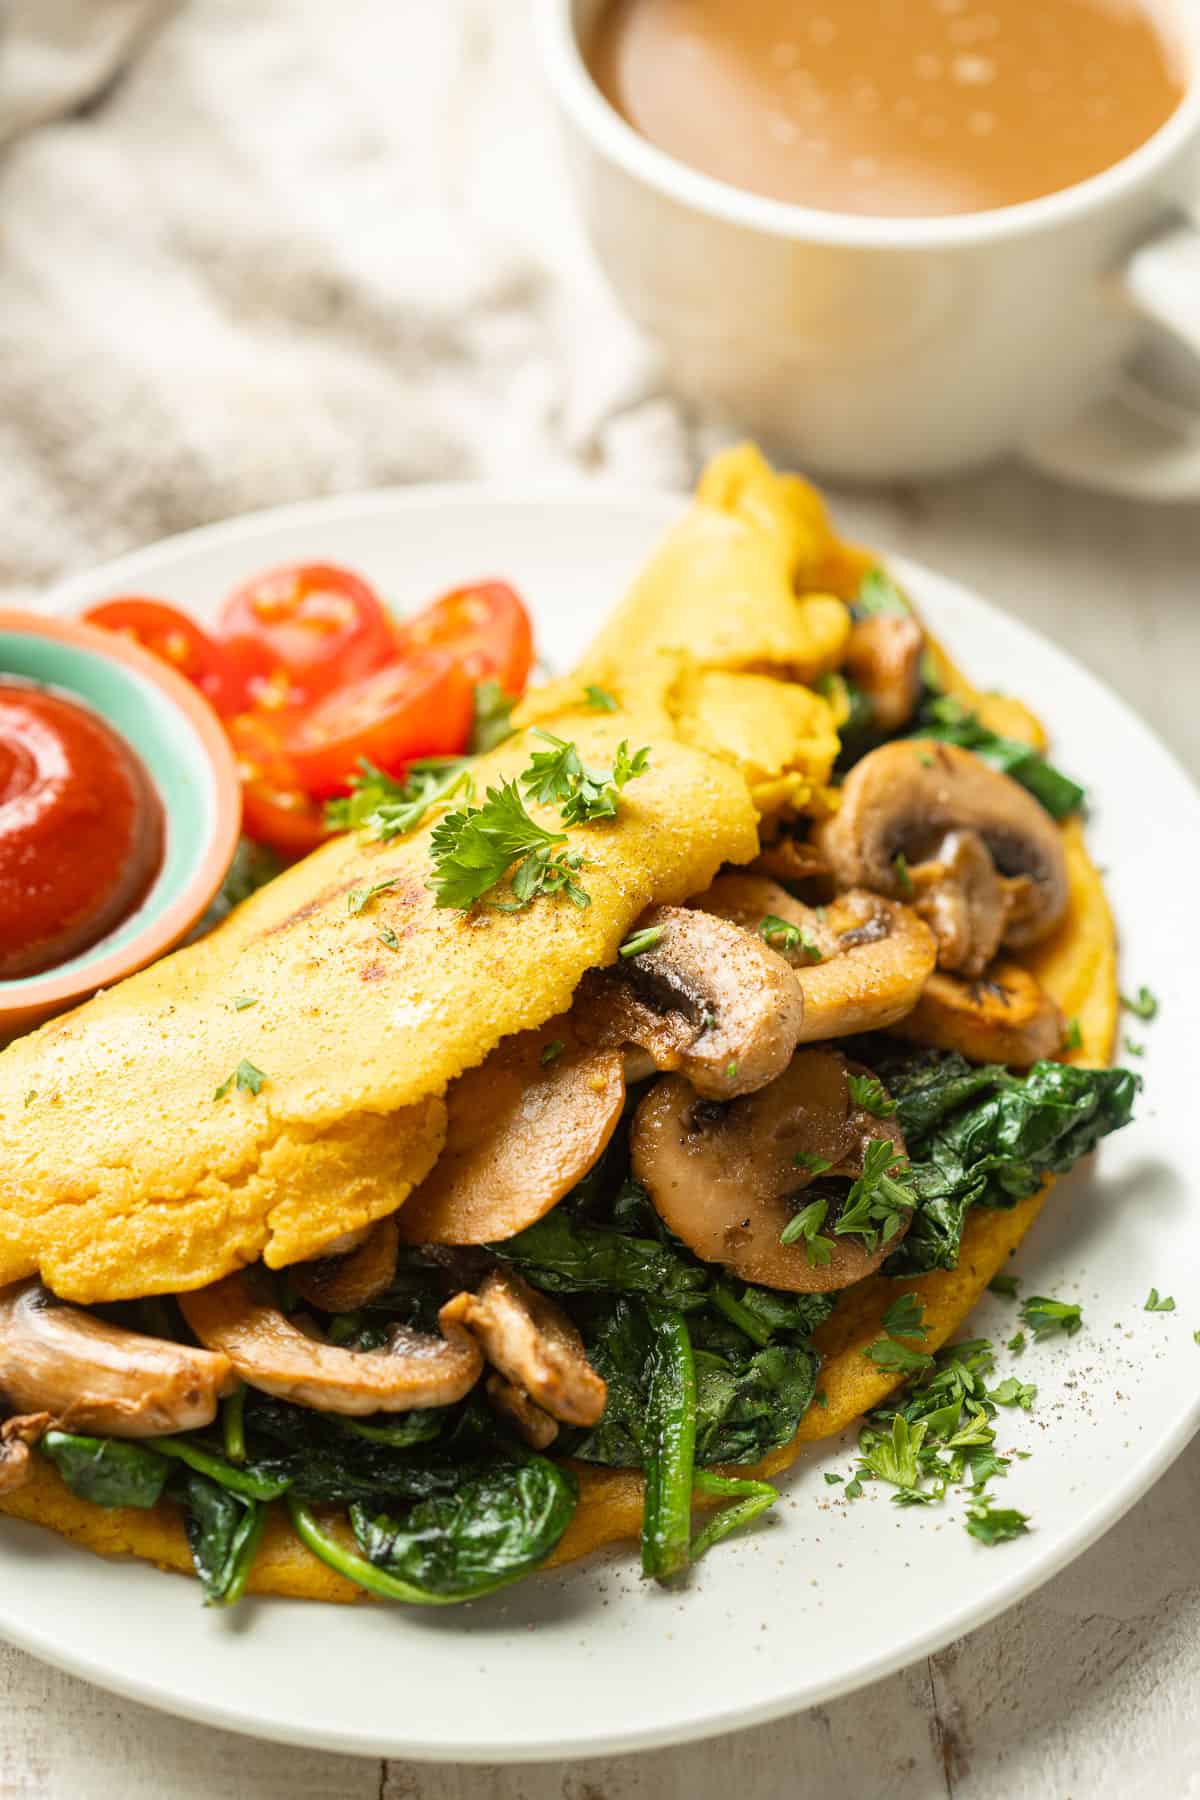 Vegan omelette stuffed with mushrooms and spinach on a plate with a cup of coffee in the background.